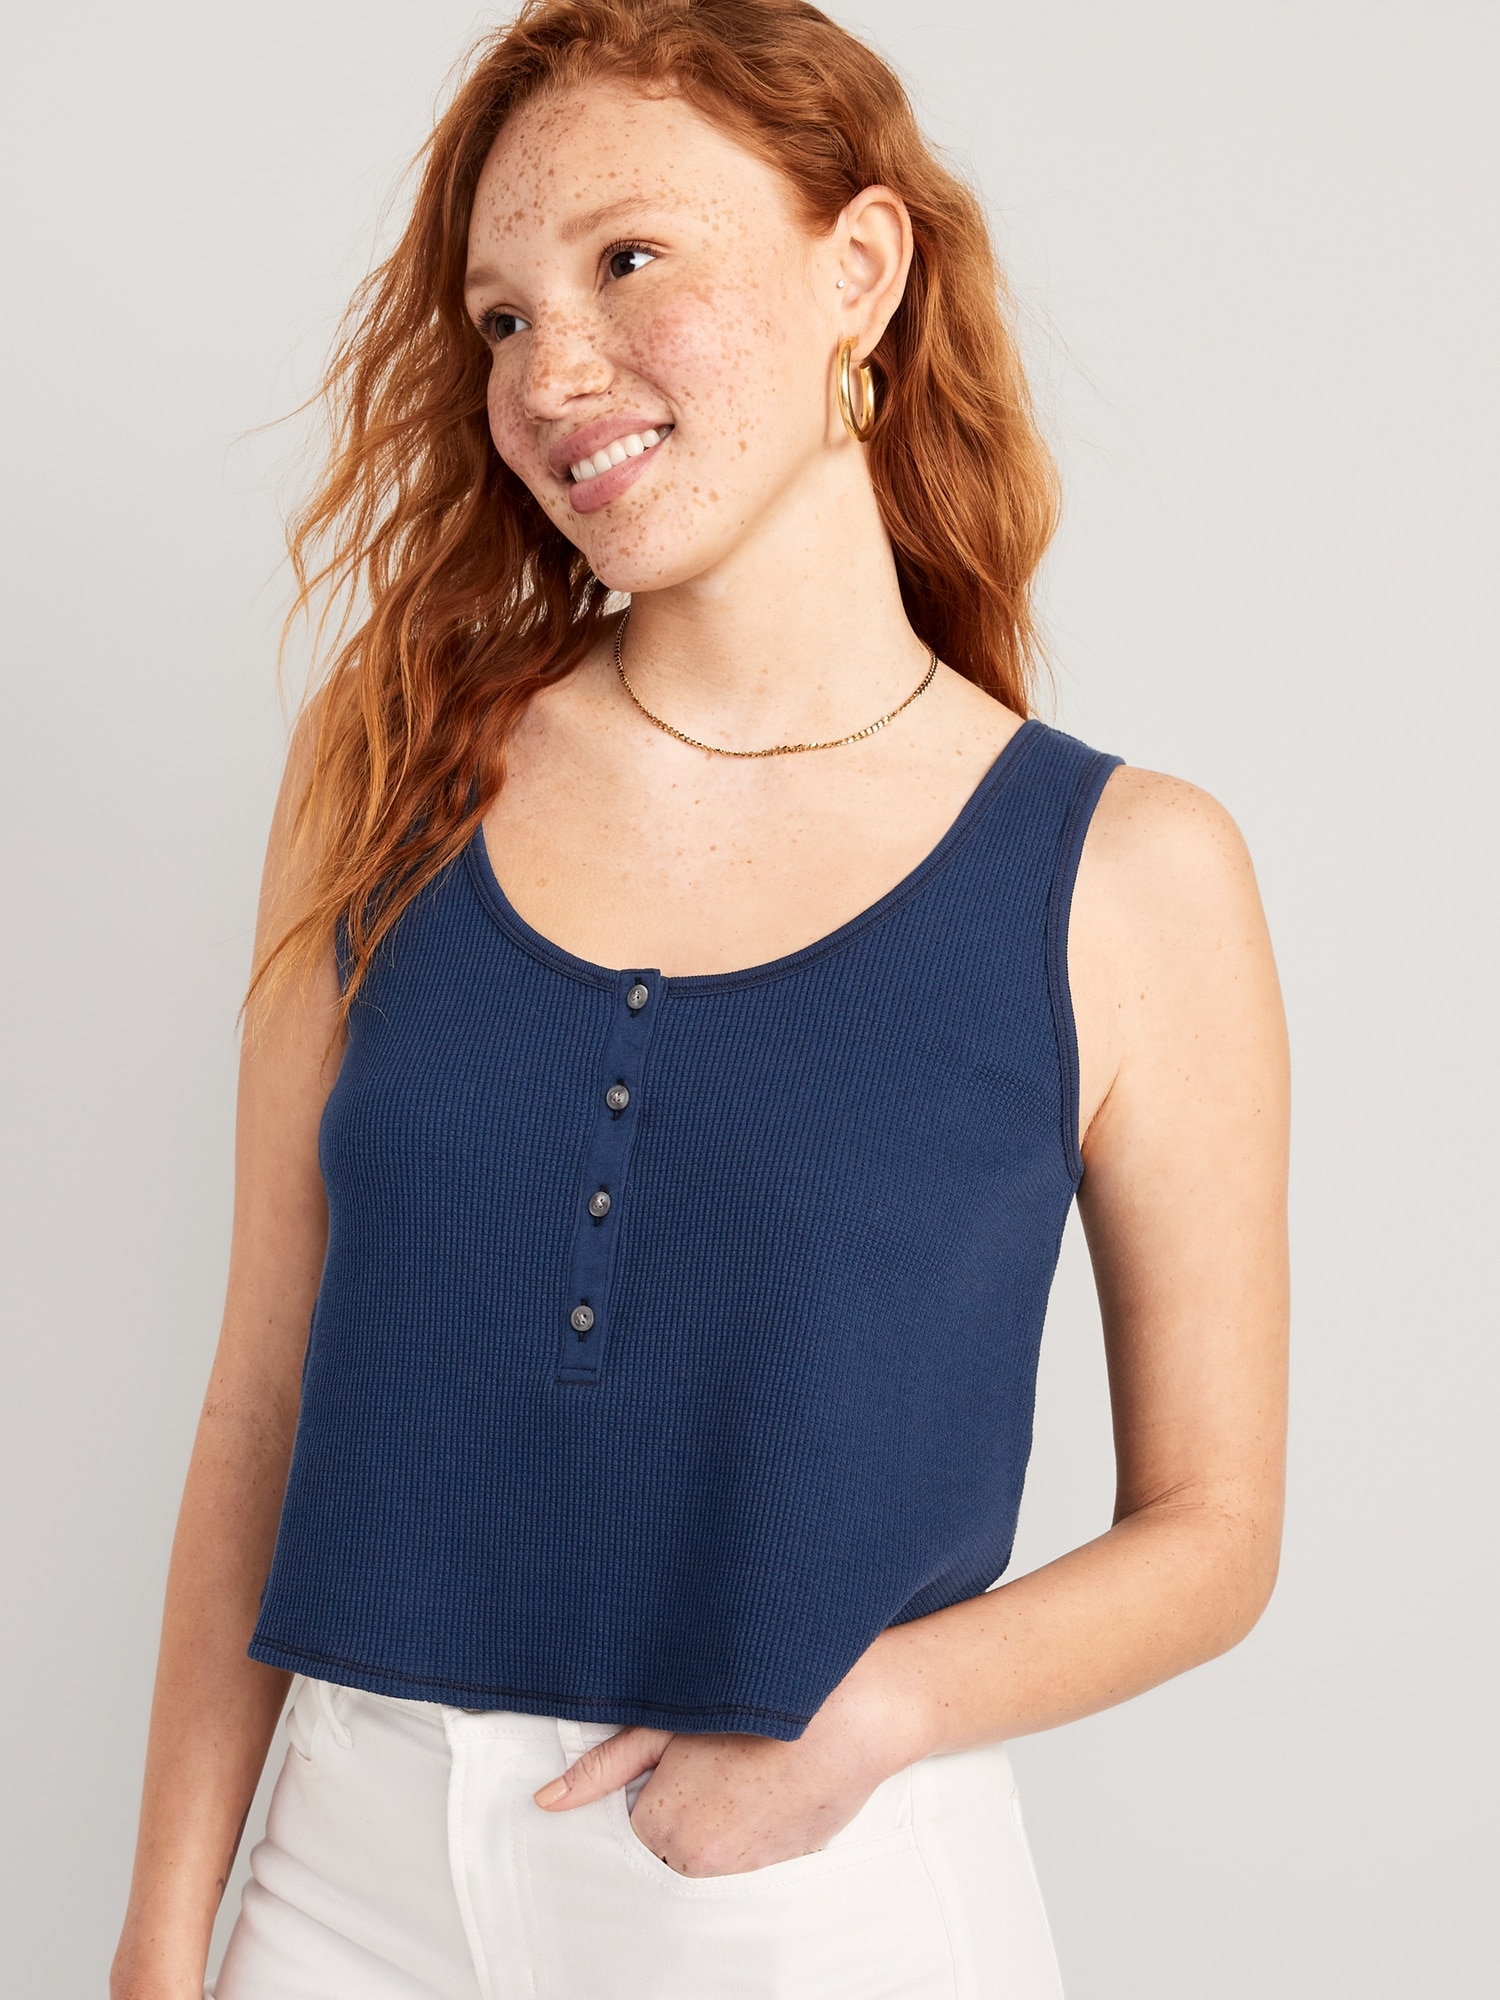 Thermal-Knit Cropped Henley Tank Top